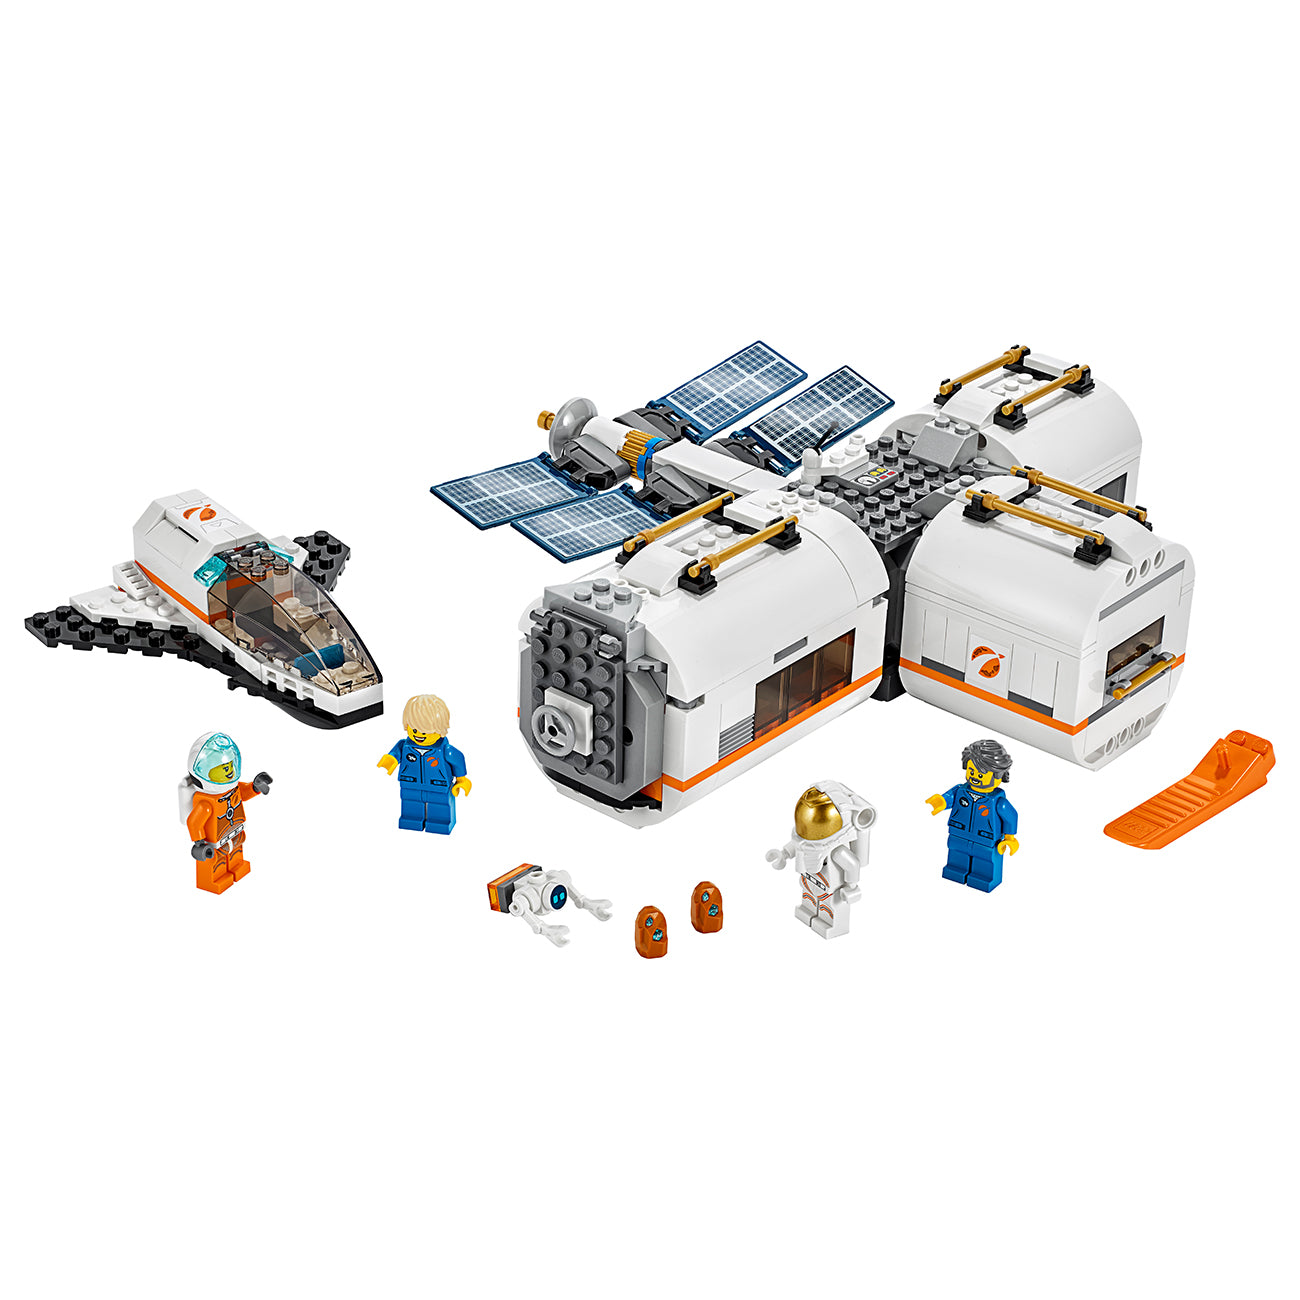 LEGO Lunar Space Station – The Store